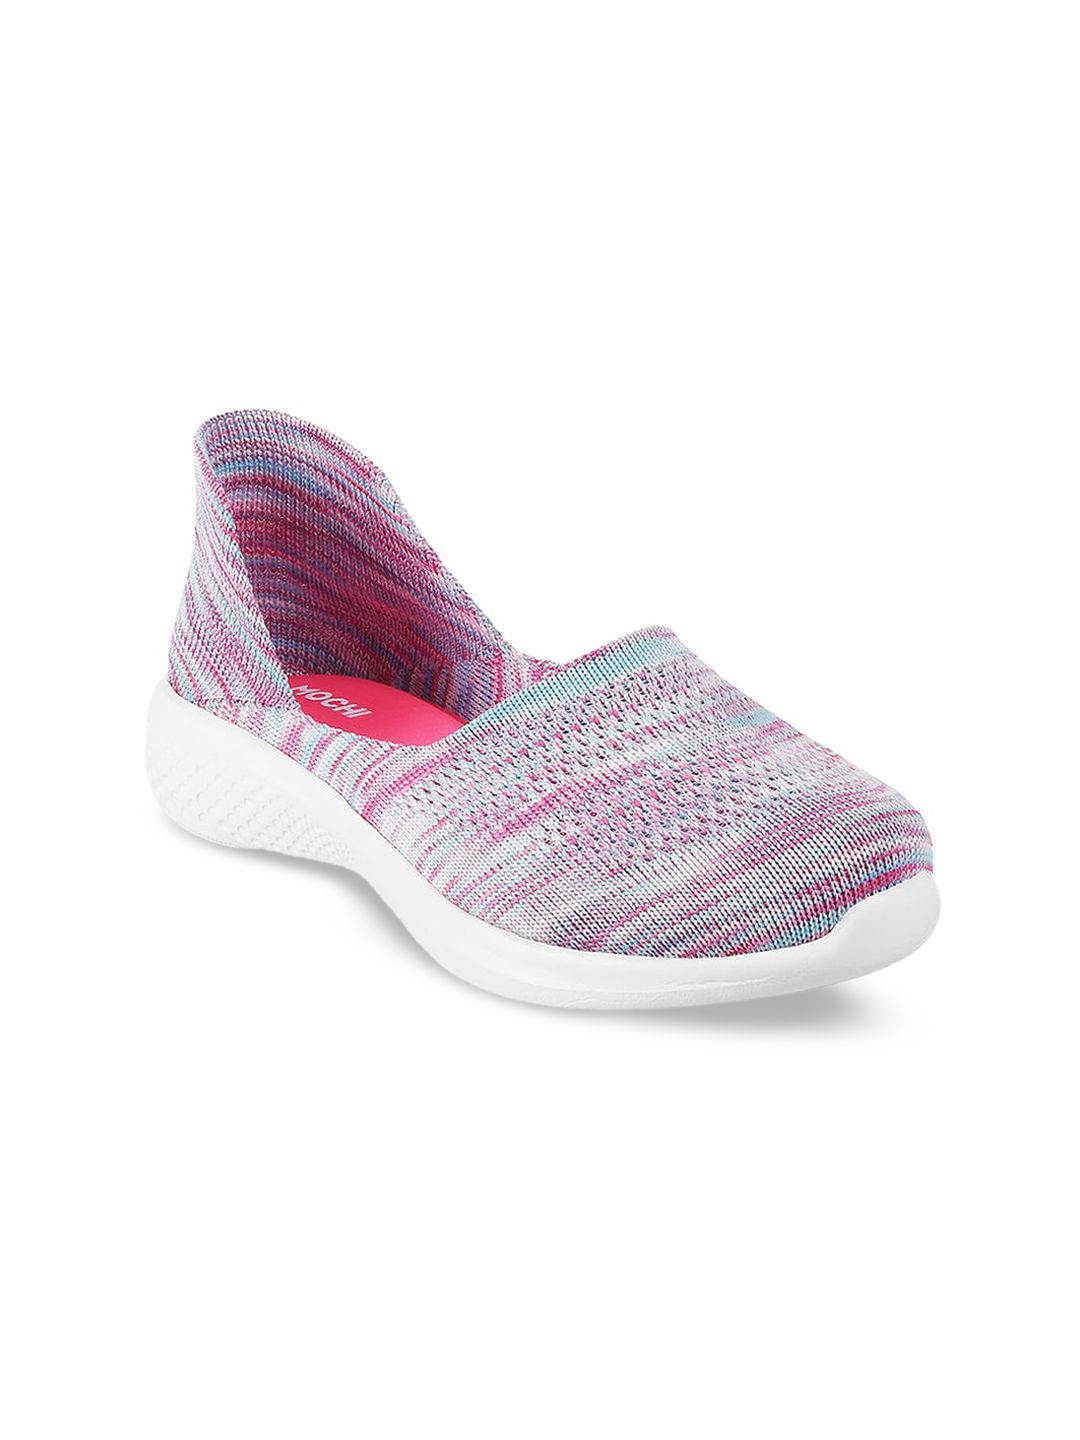 Mochi Women Pink Printed Slip-On Sneakers Price in India